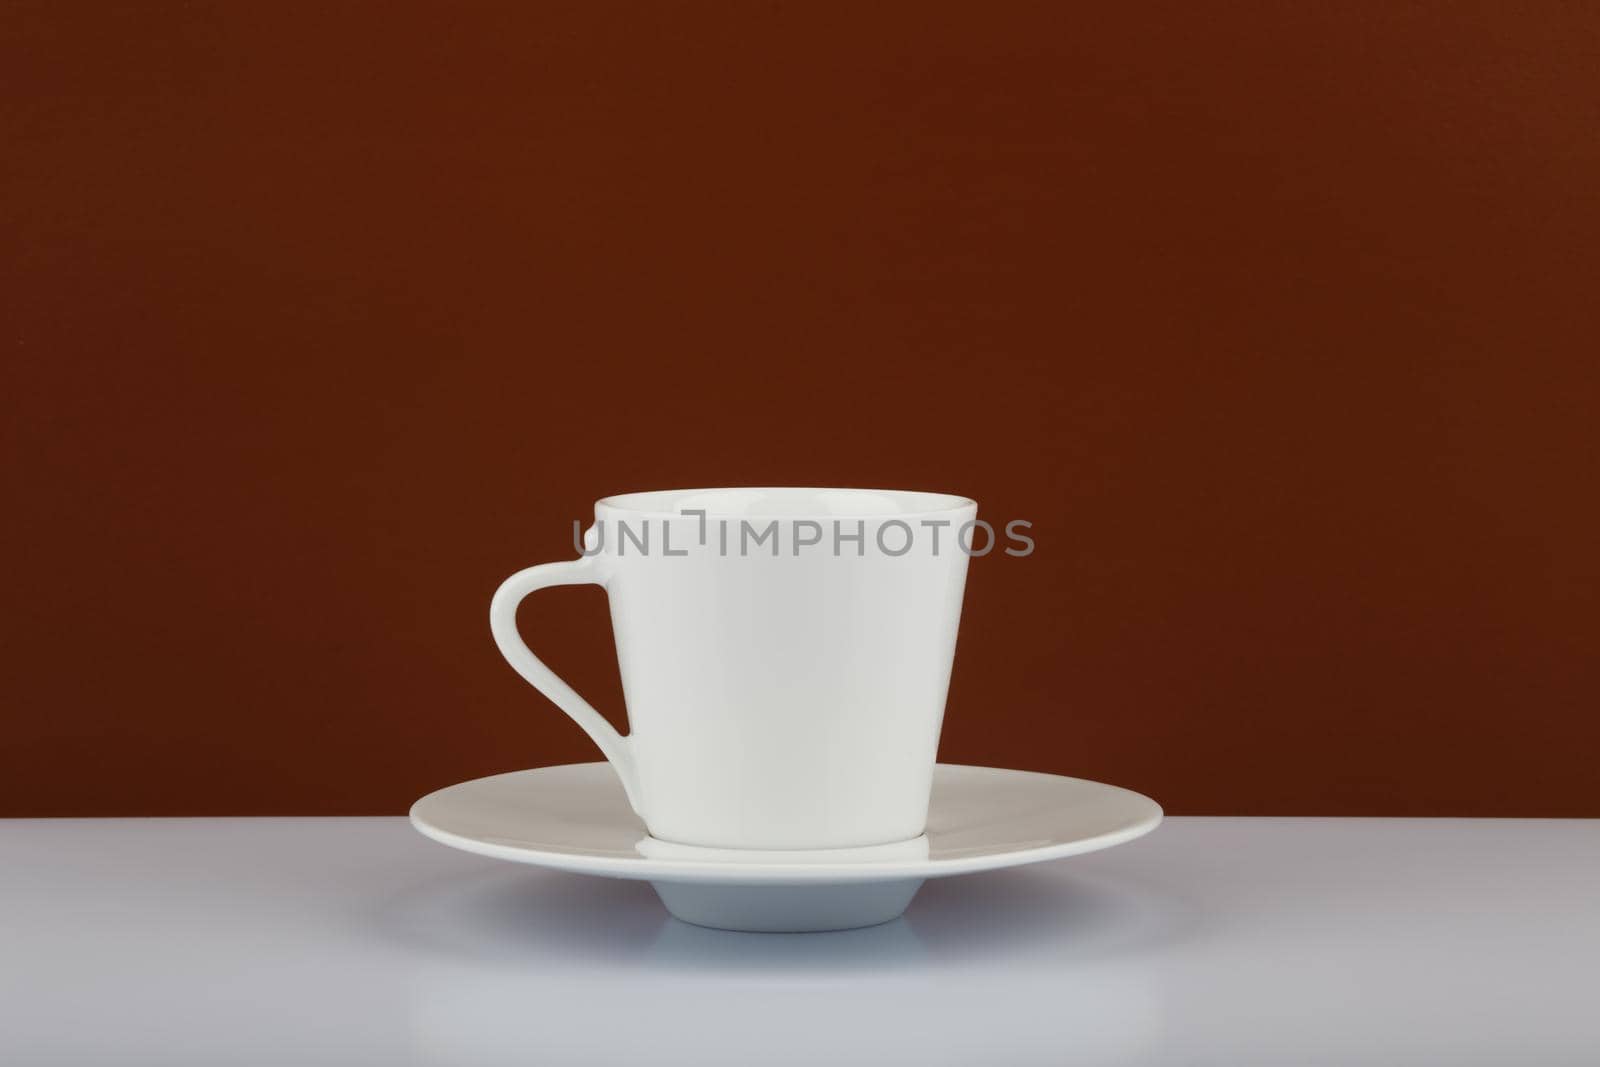 Still life with white ceramic coffee cup on plate against brown background with space for text. 